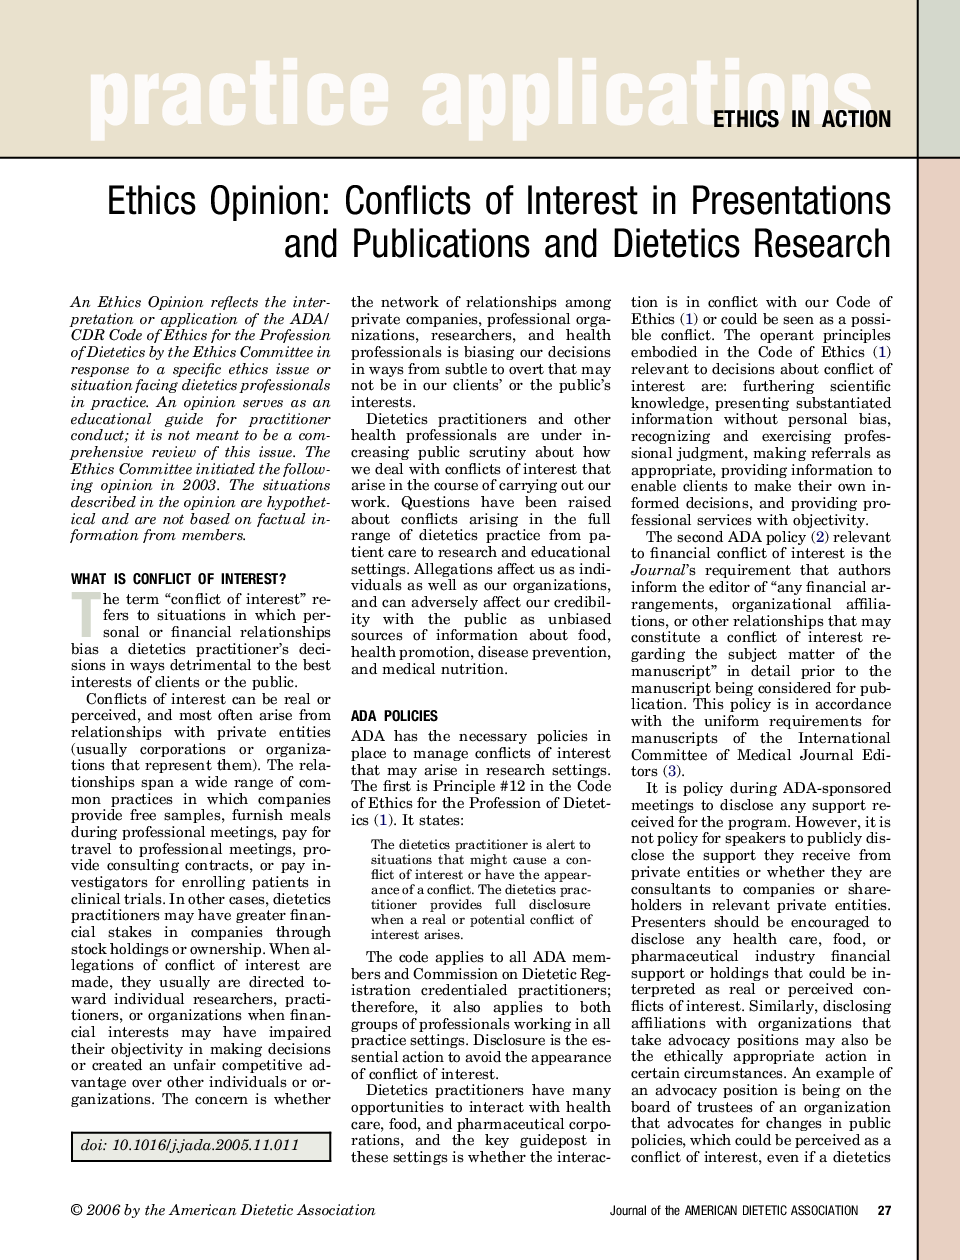 Ethics Opinion: Conflicts of Interest in Presentations and Publications and Dietetics Research